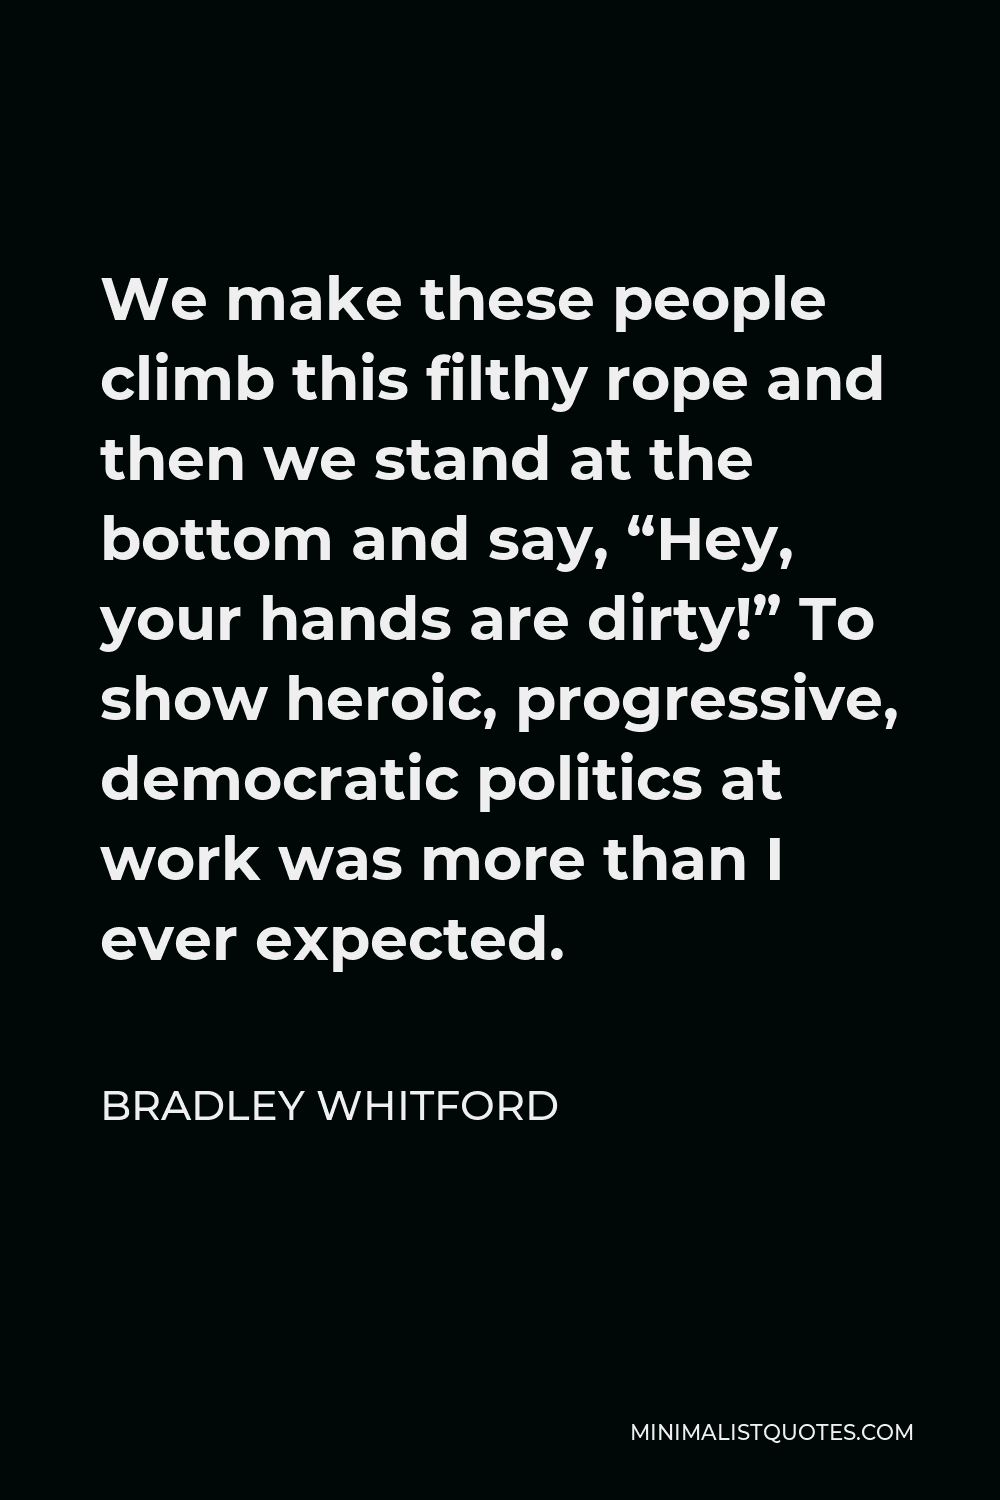 Bradley Whitford Quote - We make these people climb this filthy rope and then we stand at the bottom and say, “Hey, your hands are dirty!” To show heroic, progressive, democratic politics at work was more than I ever expected.